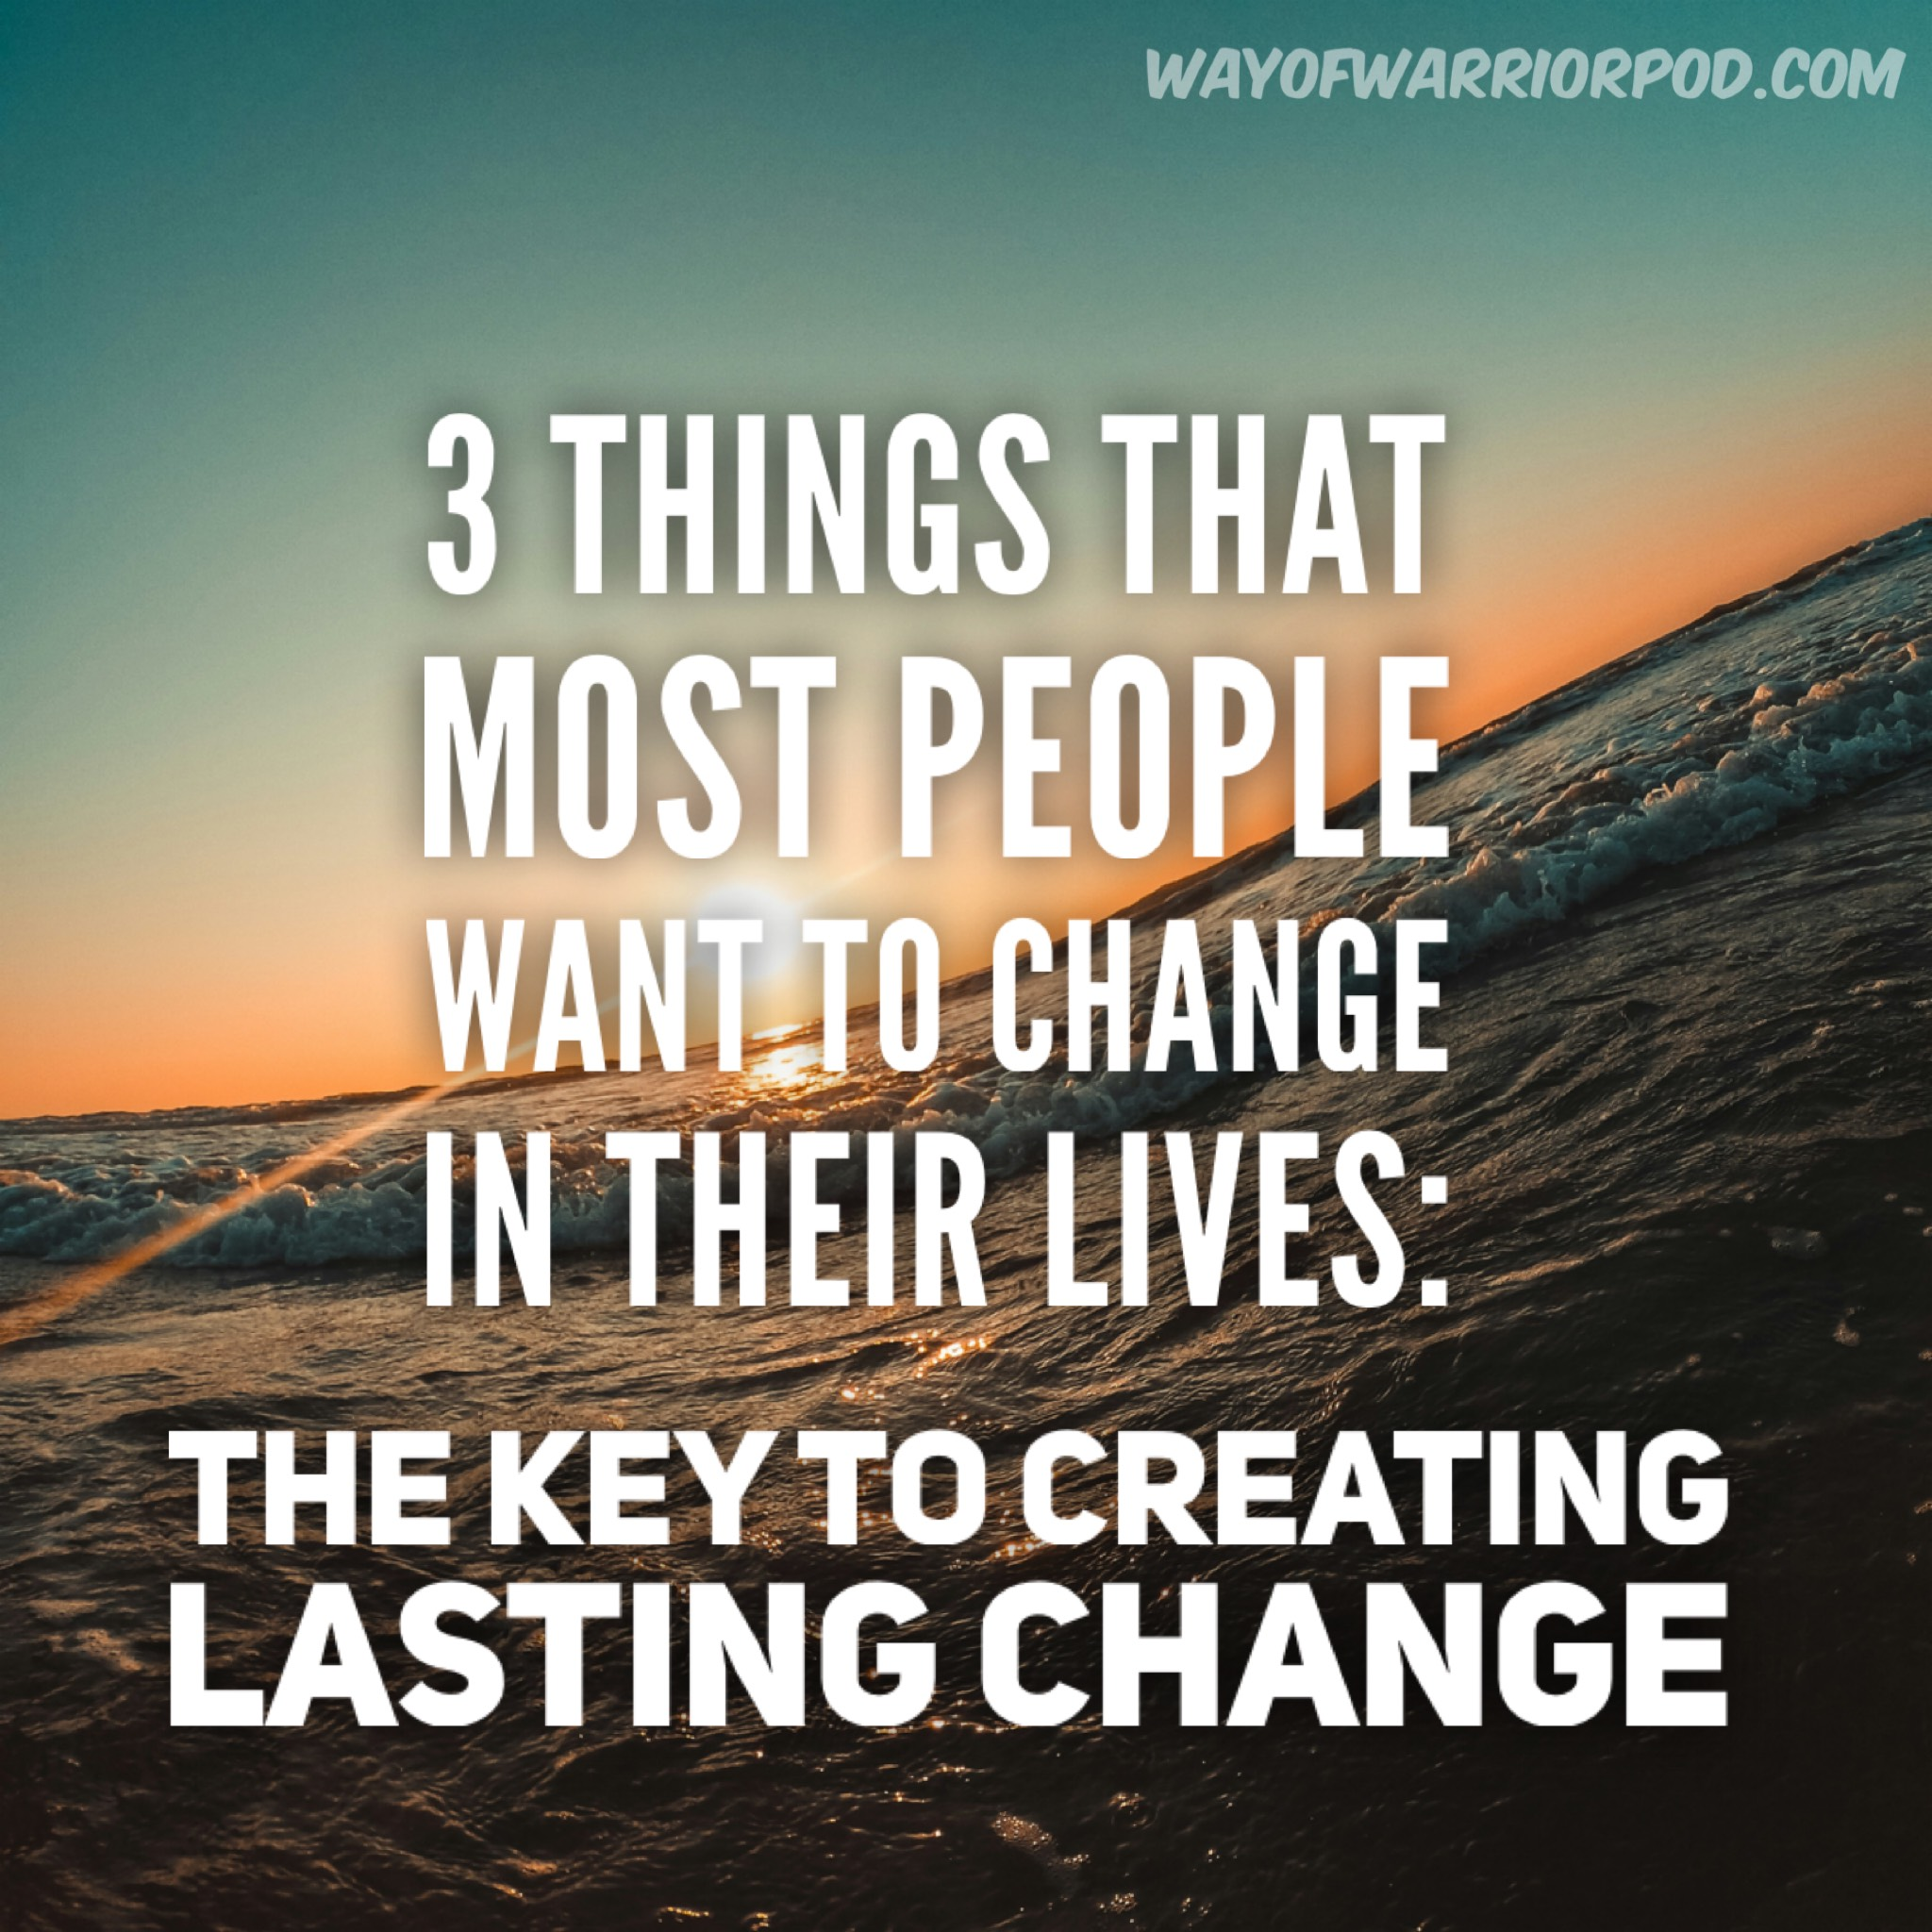 3 Things That Most People Want to Change in Their Lives: The Key to Creating Lasting Change